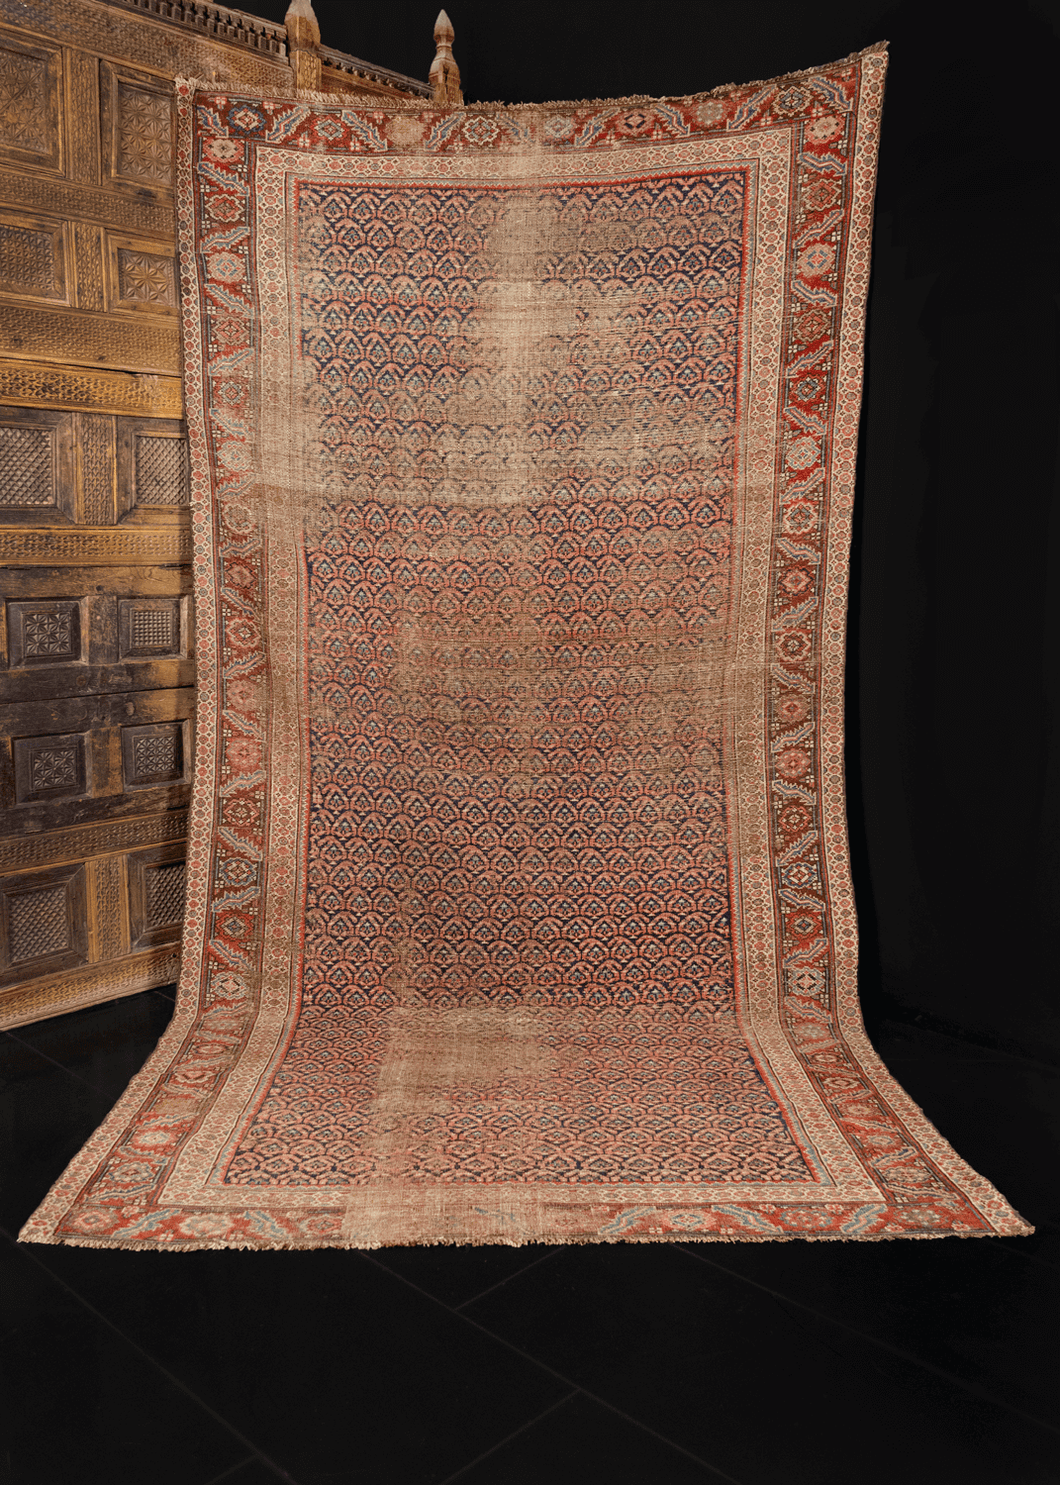 Northwest Persian rug handwoven first quarter of 20th century. Allover pattern of small both in blues and pinks. Main border classic design of leaves and flowers often found in the region. 